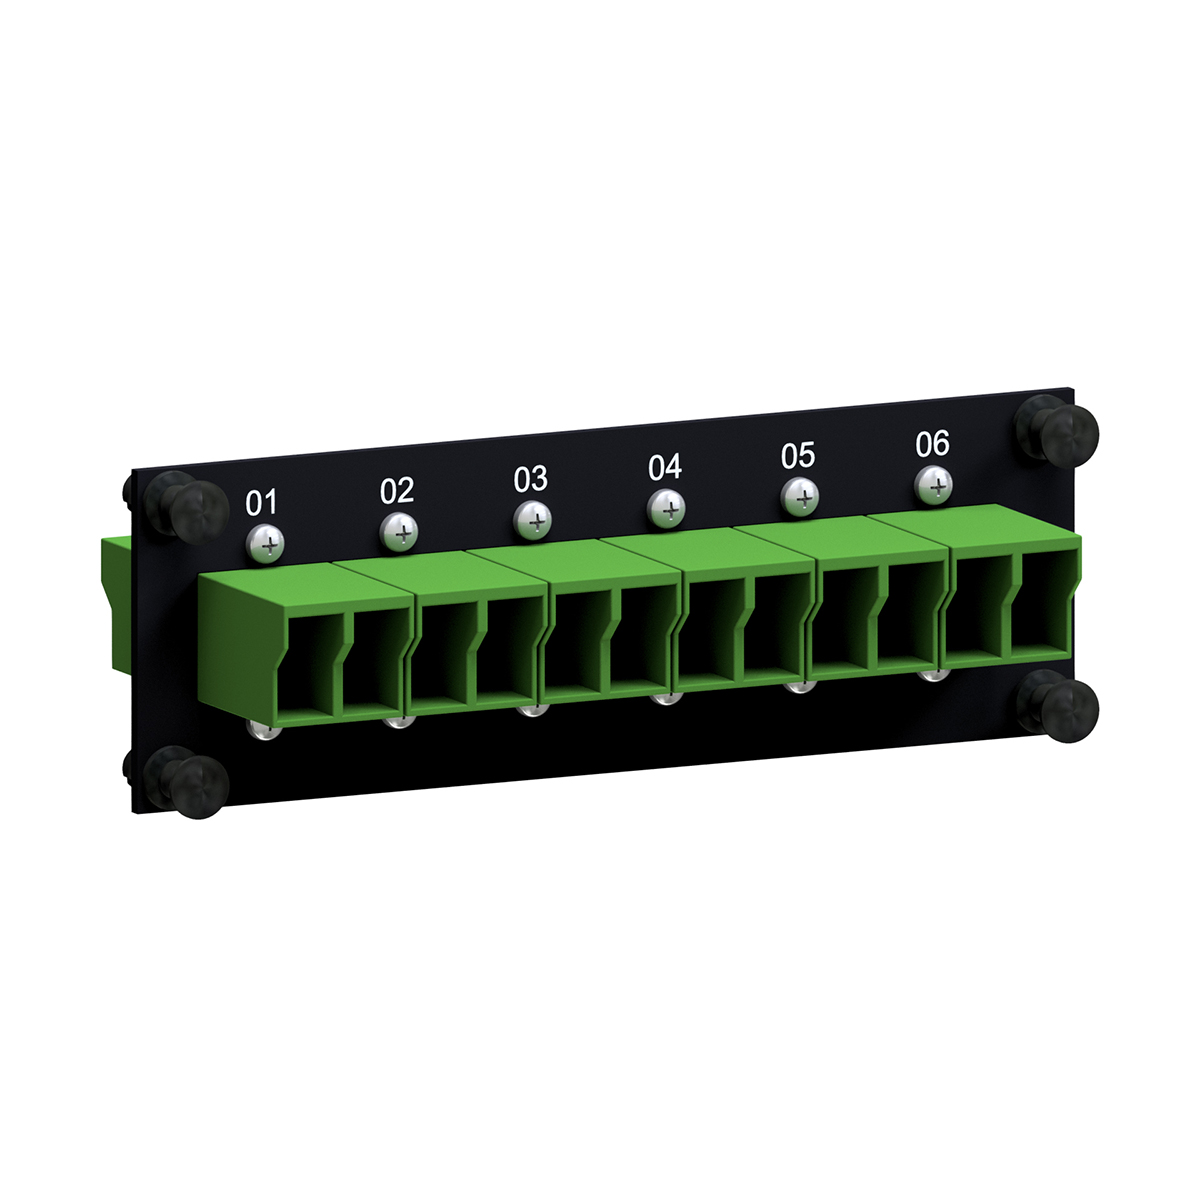 SMAP-G2 SD 1 HU 1/4 part front plate with E2000-Compact-HRL APC singlemode OS2 green